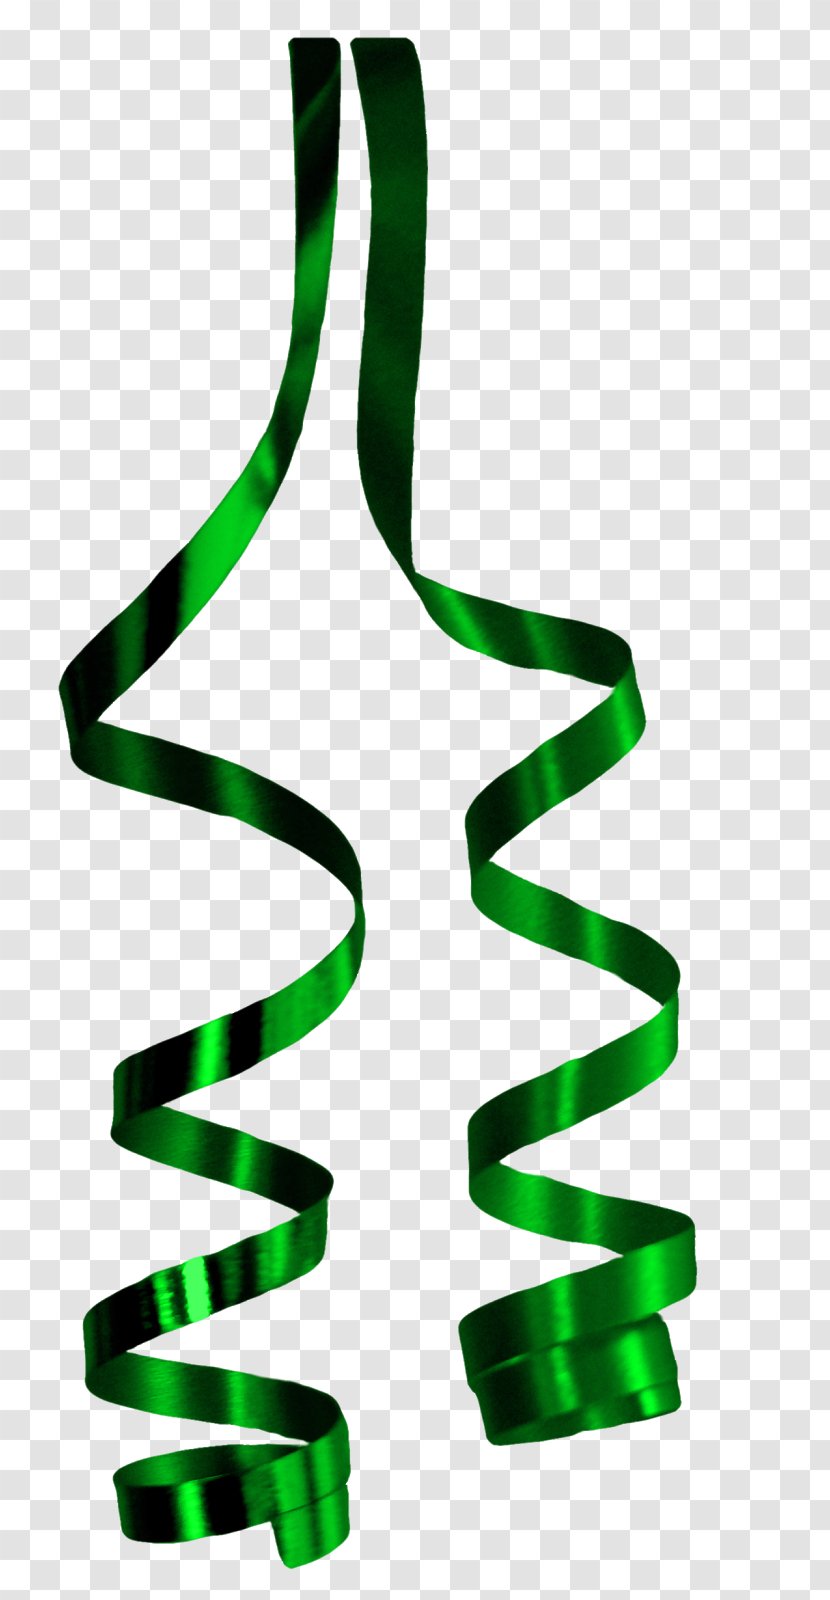 New Year's Day Christmas Eve Ribbon - Tree - Green Ribbons Tambourine Transparent PNG